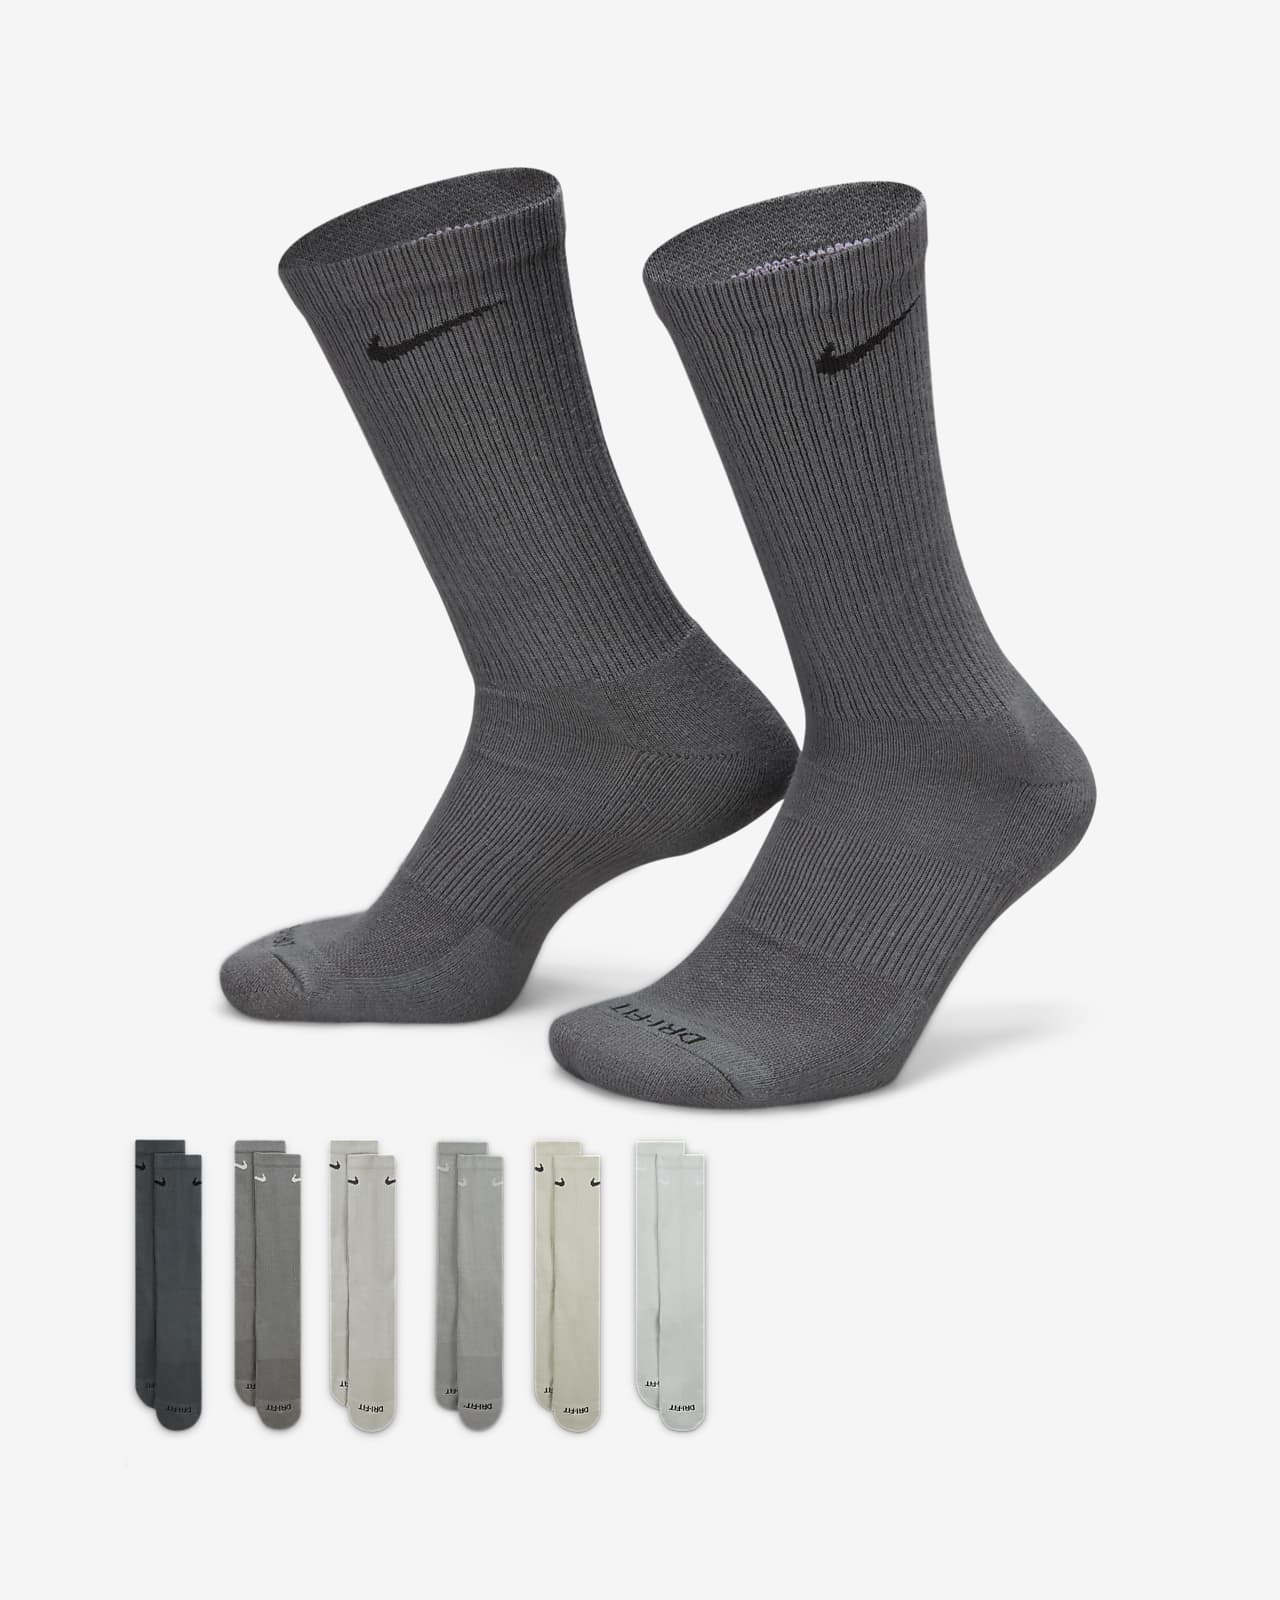 Nike Unisex Everyday Cotton Cushioned Crew Training Socks with DRI-FIT  Technology, Large Black (Pack of 6 Pairs)